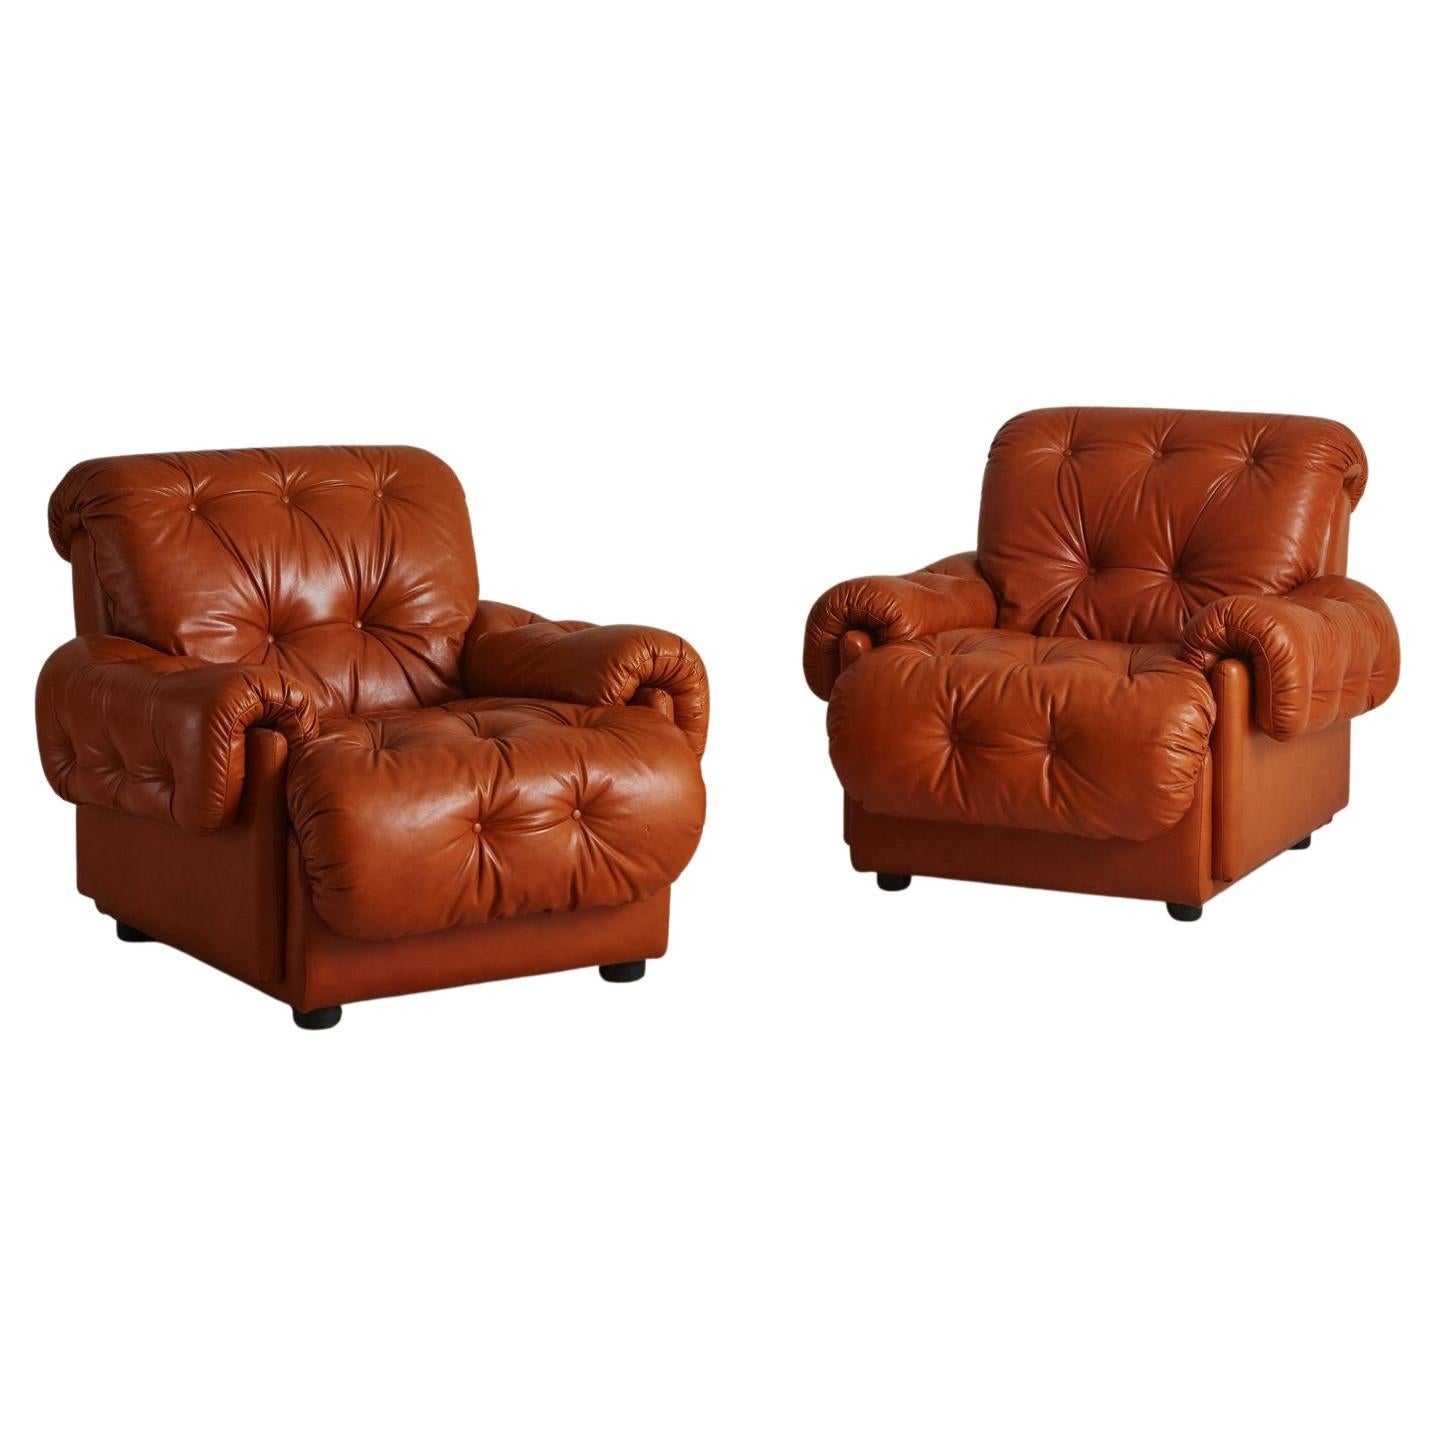 Pair of Button Tufted Cognac Leather Lounge Chairs, Italy, 1960s